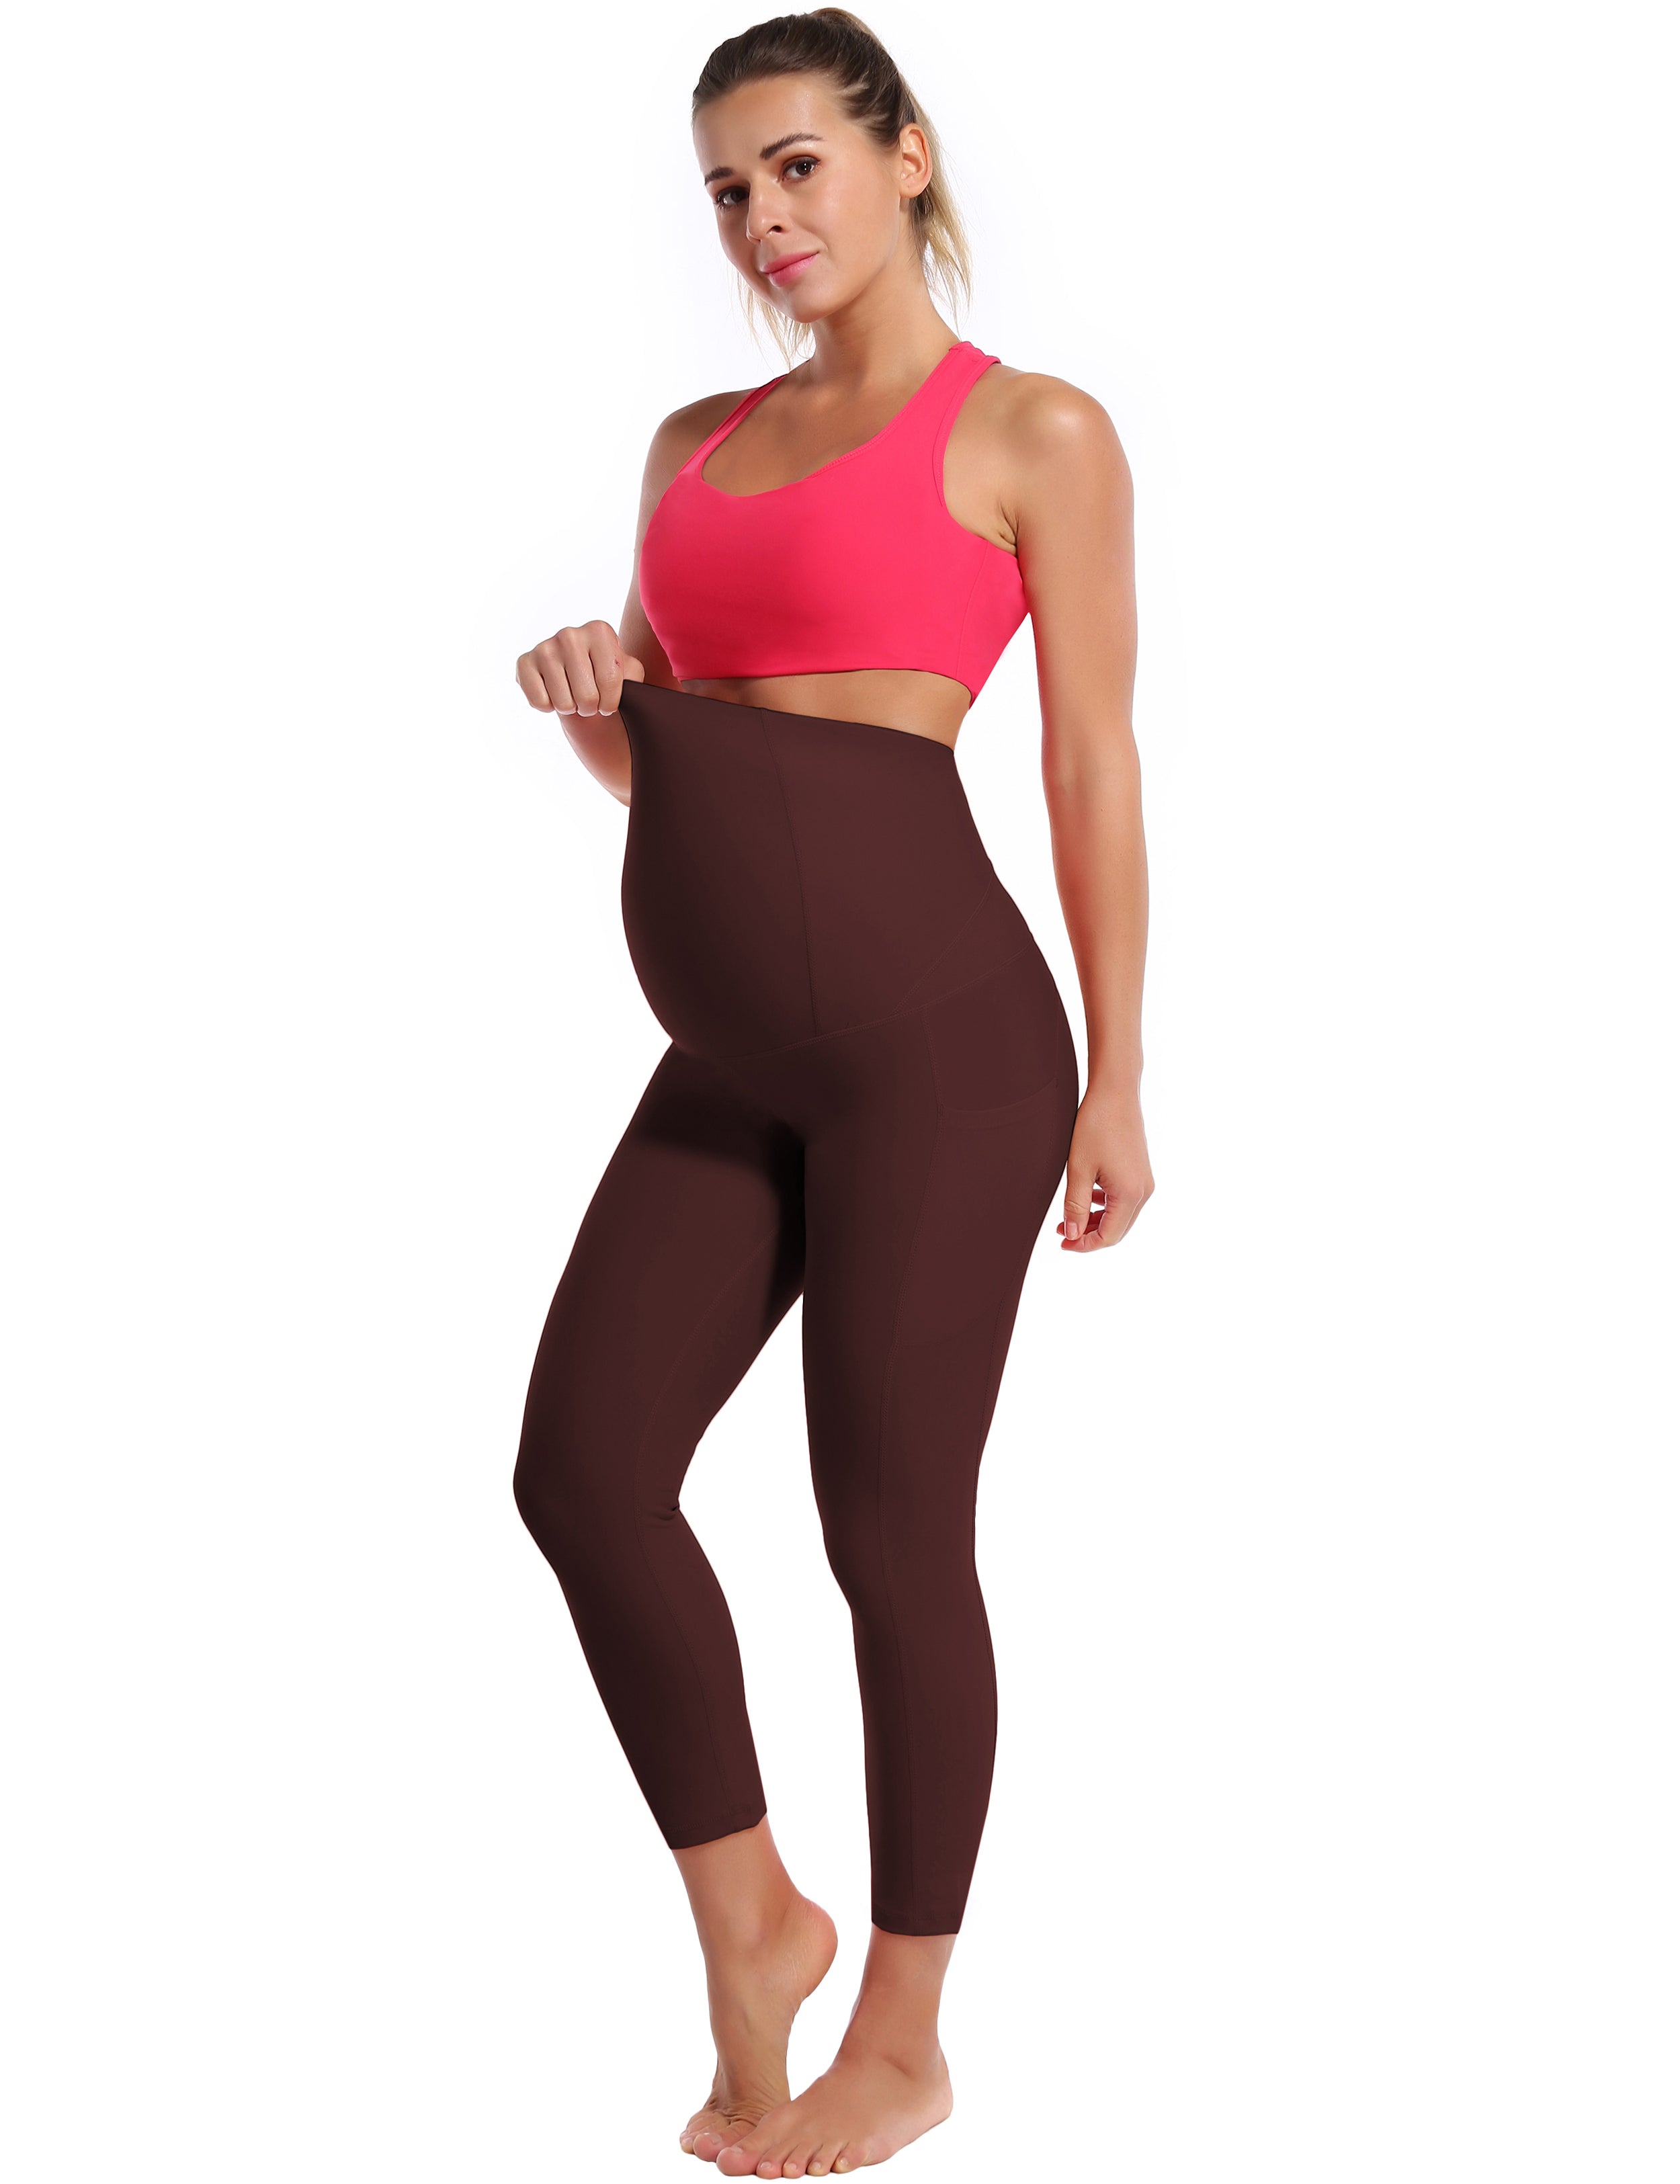 22" Side Pockets Maternity Yoga Pants mahoganymaroon 87%Nylon/13%Spandex Softest-ever fabric High elasticity 4-way stretch Fabric doesn't attract lint easily No see-through Moisture-wicking Machine wash